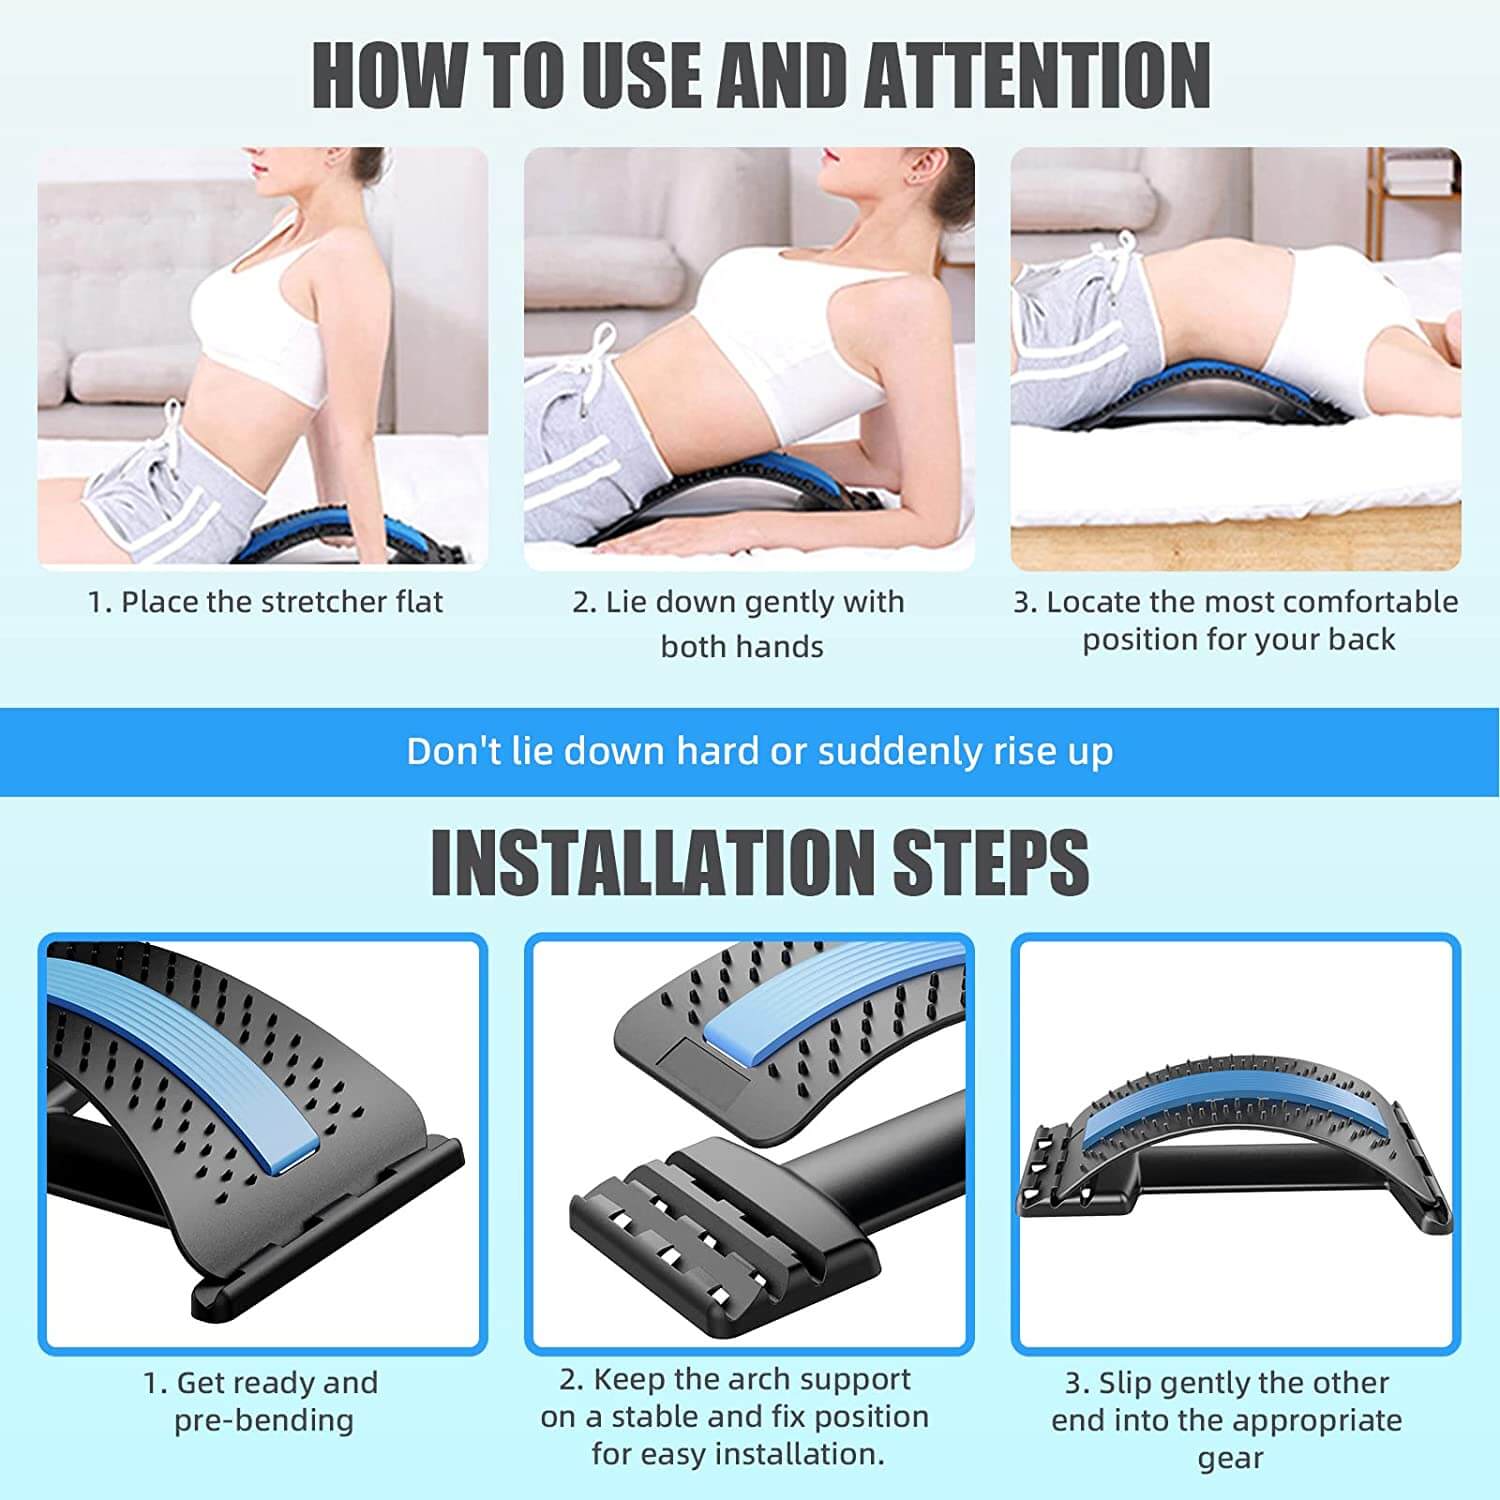 Lumbar Back Stretcher, Multi-Level Orthopedic Back Massager for herniated  disc, Scoliosis, Sciatica Pain Relief and Decompression - Black&Blue